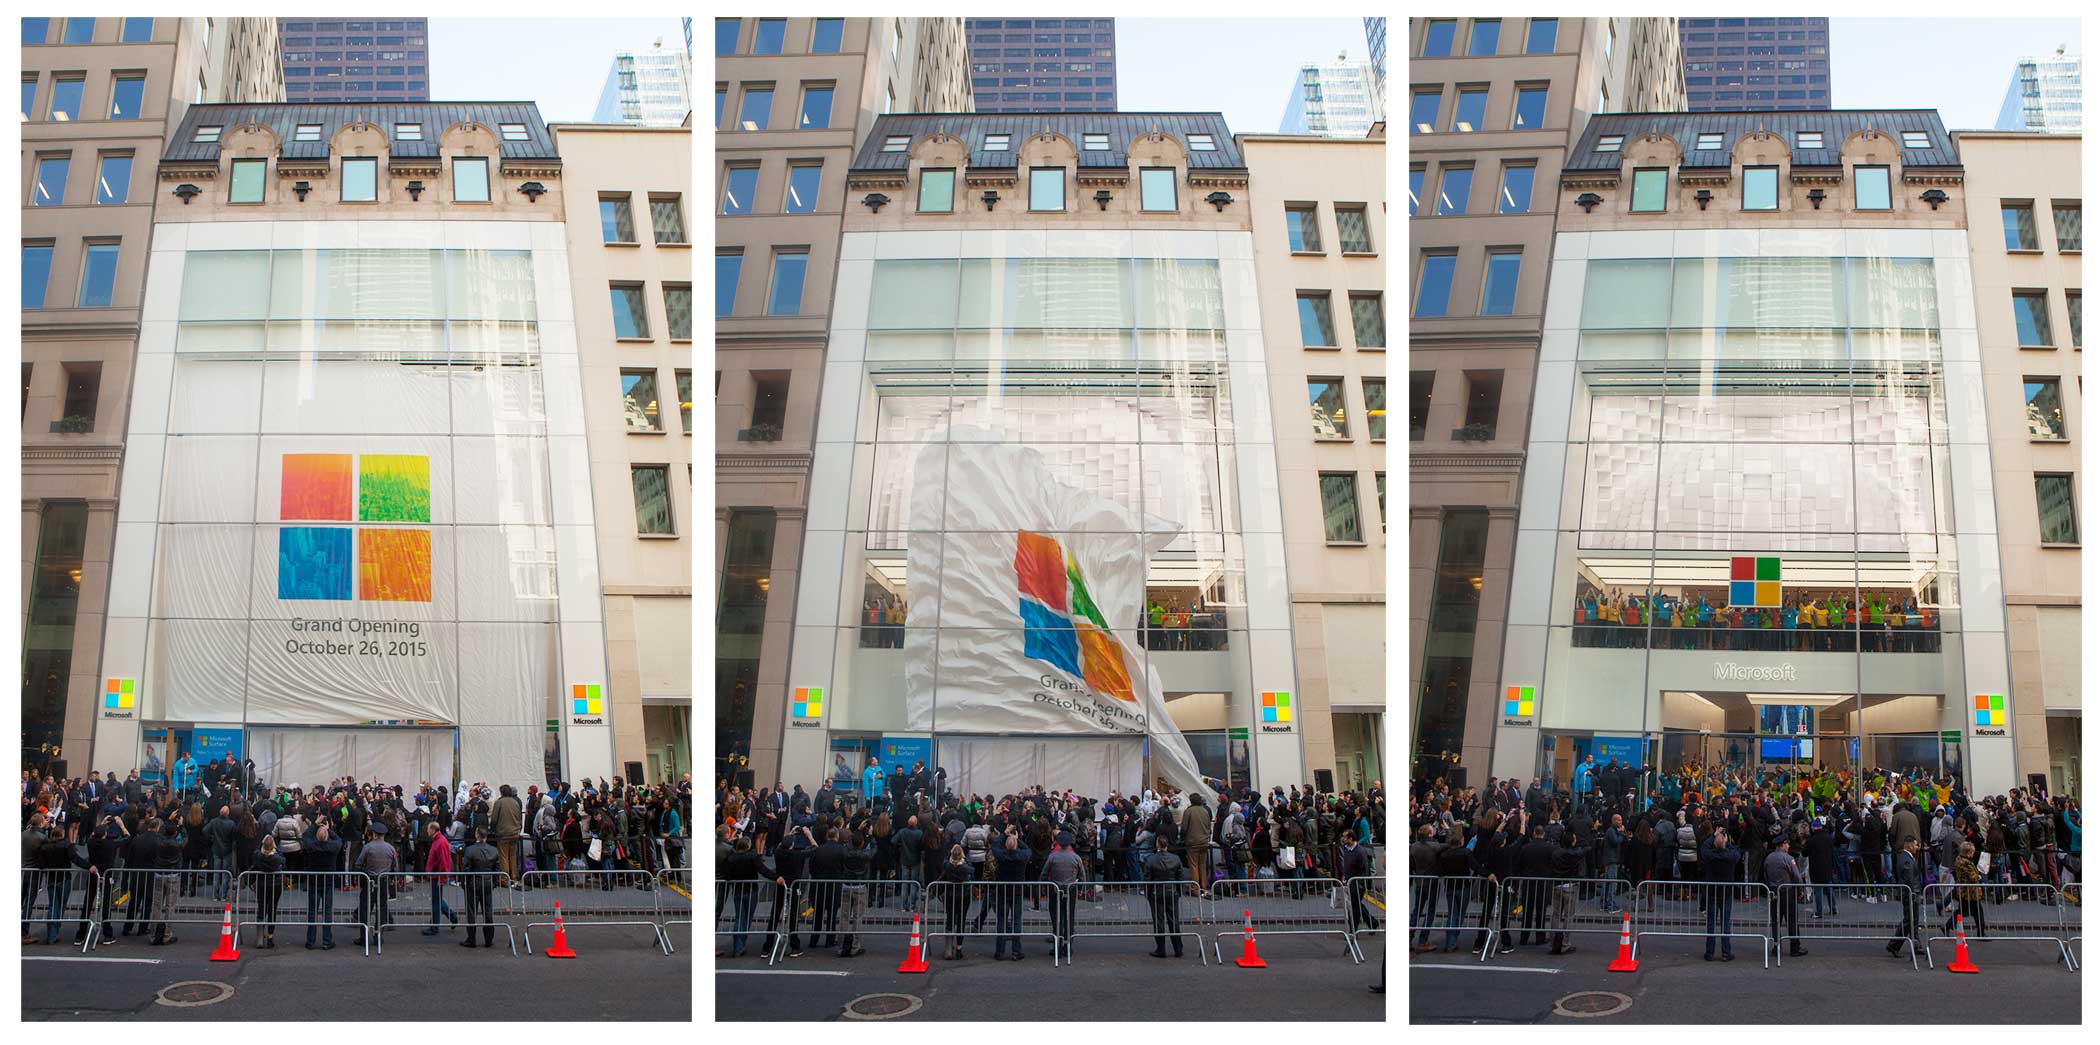 The Microsoft Store unveiling on Oct. 26, 2015.